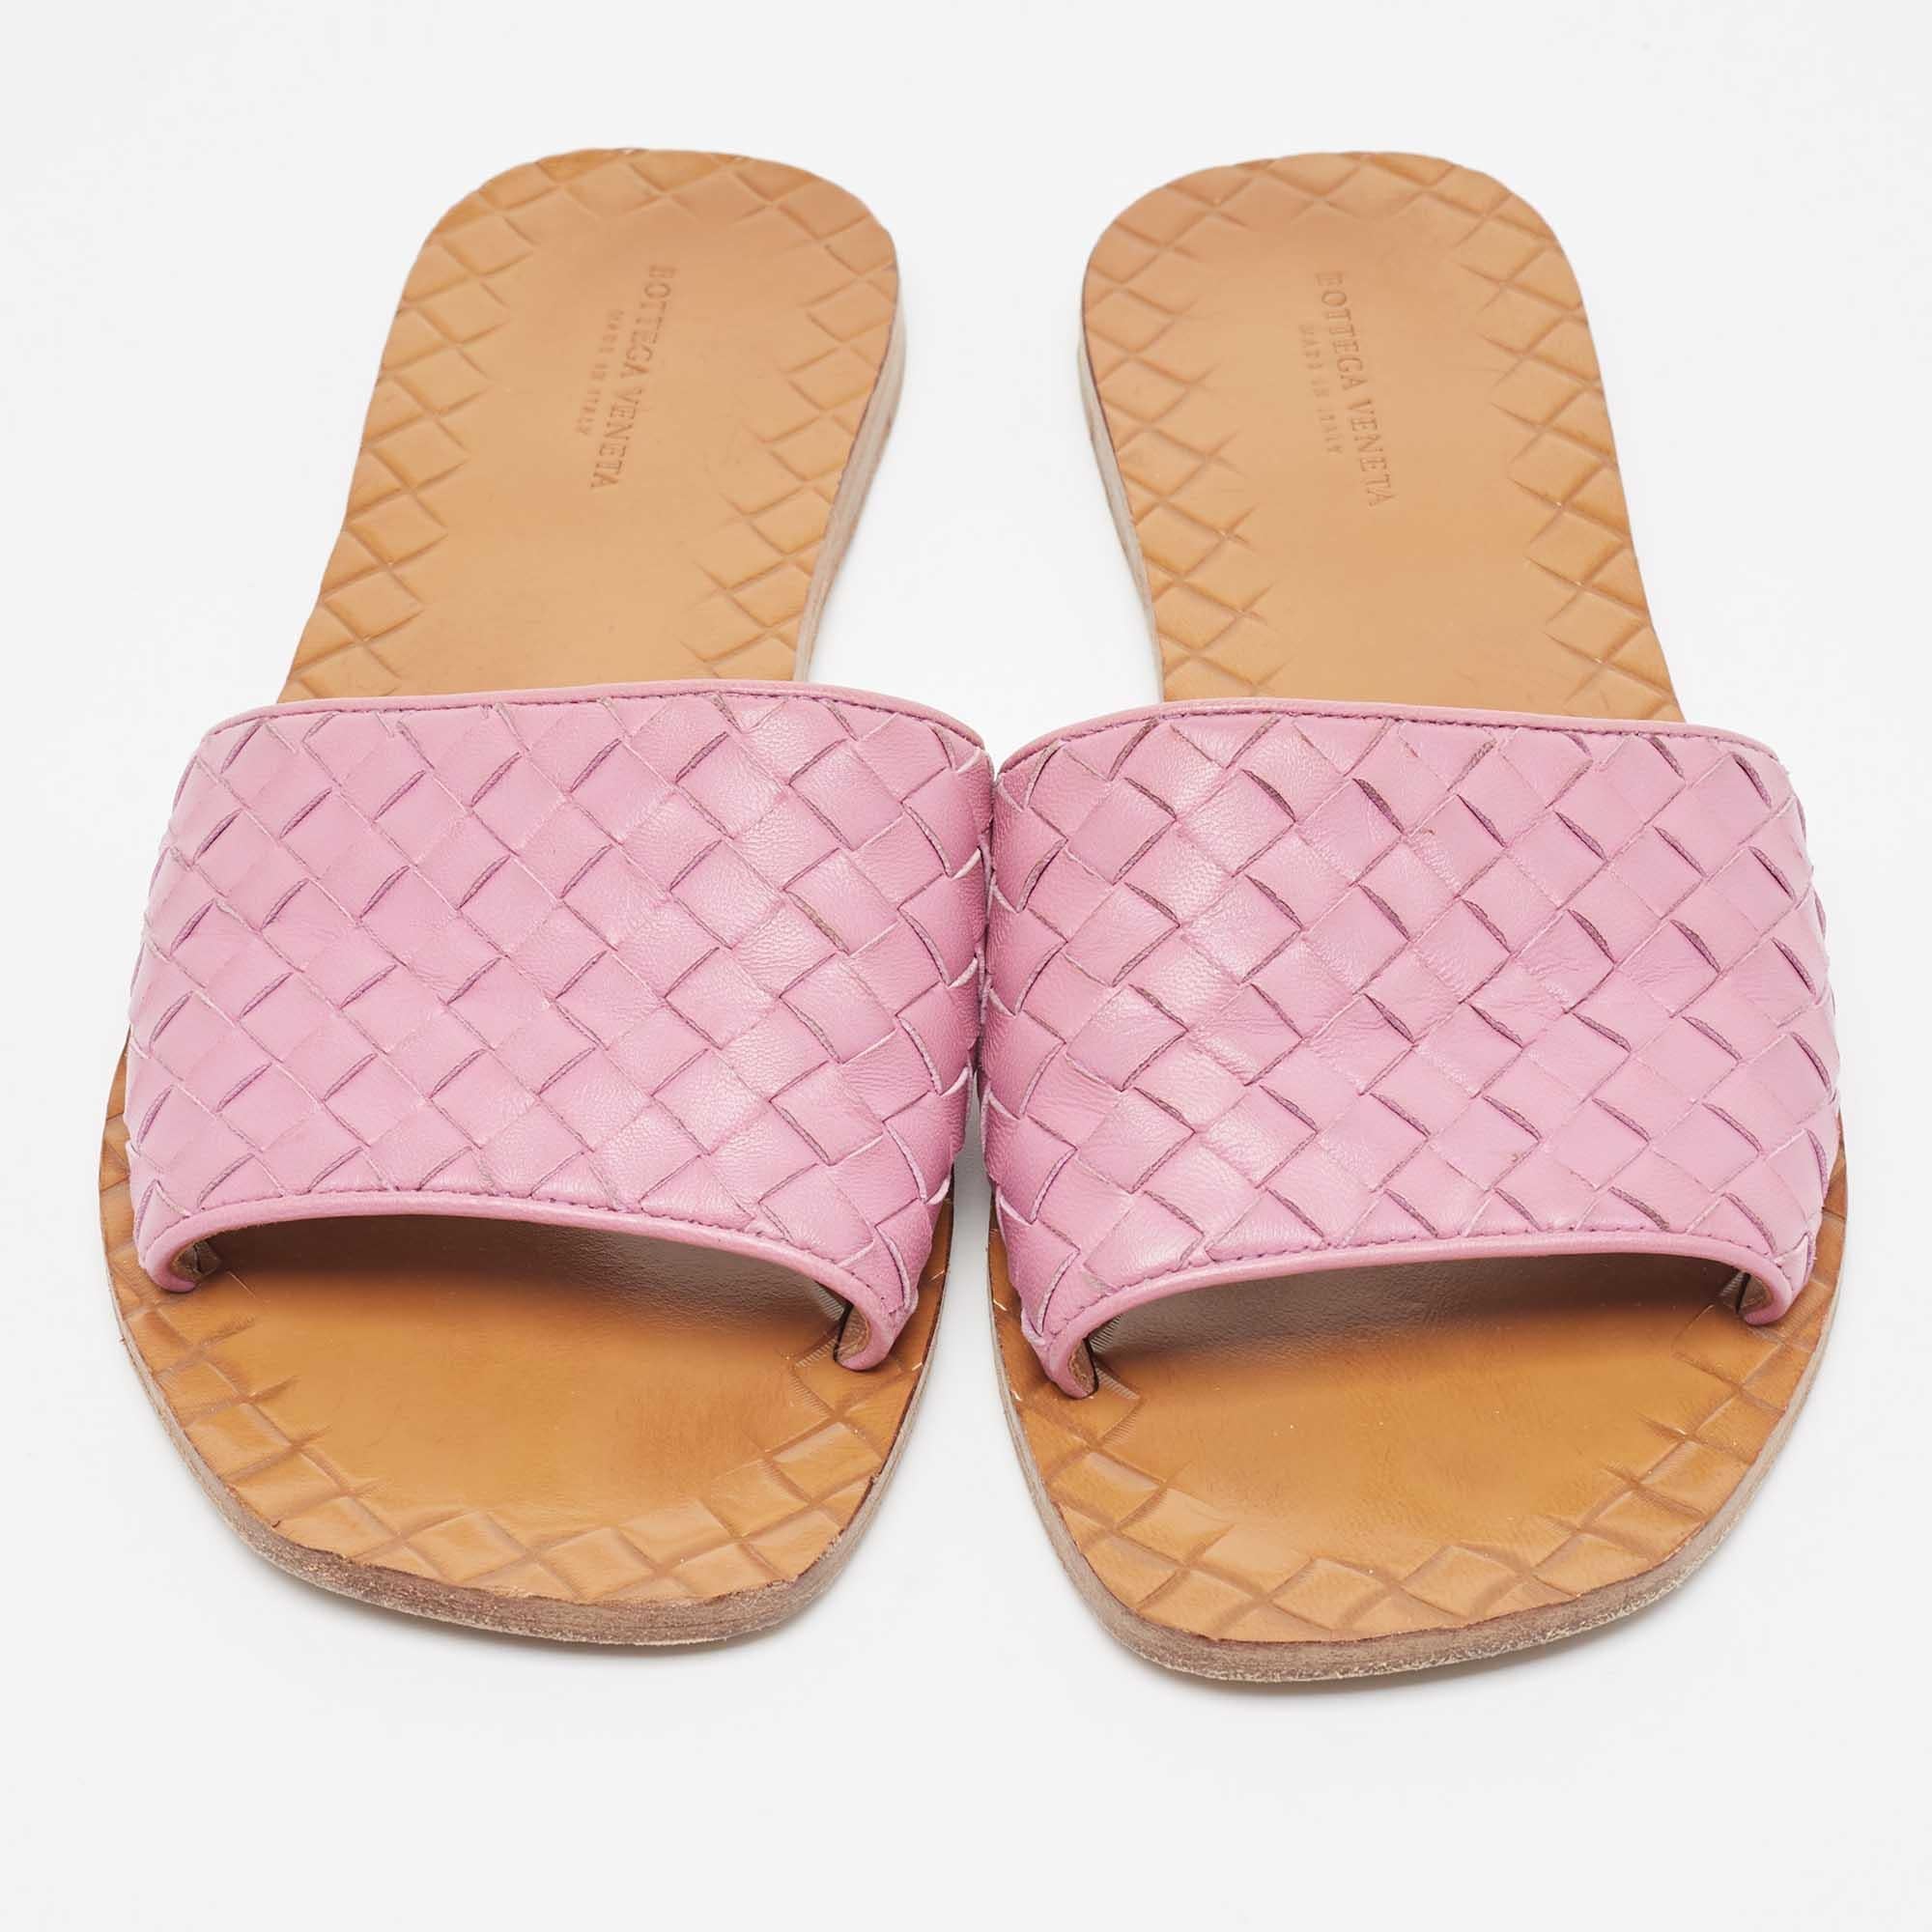 Put your best foot forward in these antique purple slides from Bottega Veneta. They've been crafted from leather and feature a strap across the vamp that boasts of the brand's signature Intrecciato weave. The footbed is also styled with touches of